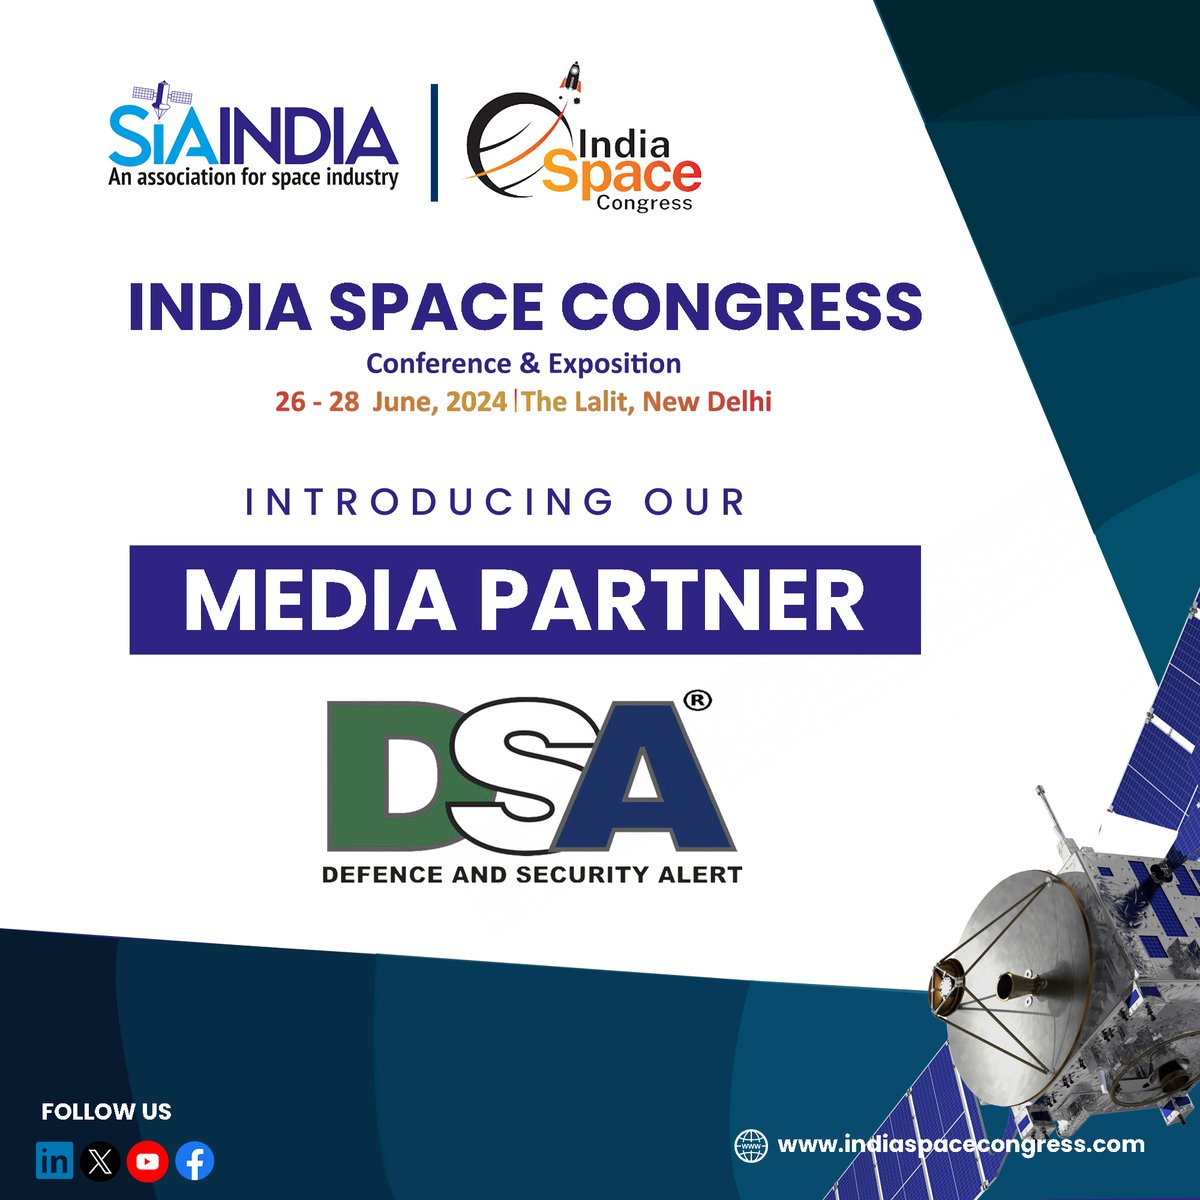 We're thrilled to announce that Defence and Security Alert (DSA) is collaborating with @SIA-India as a Media Partner. We will be actively engaged in the groundbreaking coverage of the latest developments in the space domain at the @Indian Space Congress 2024, in collaboration